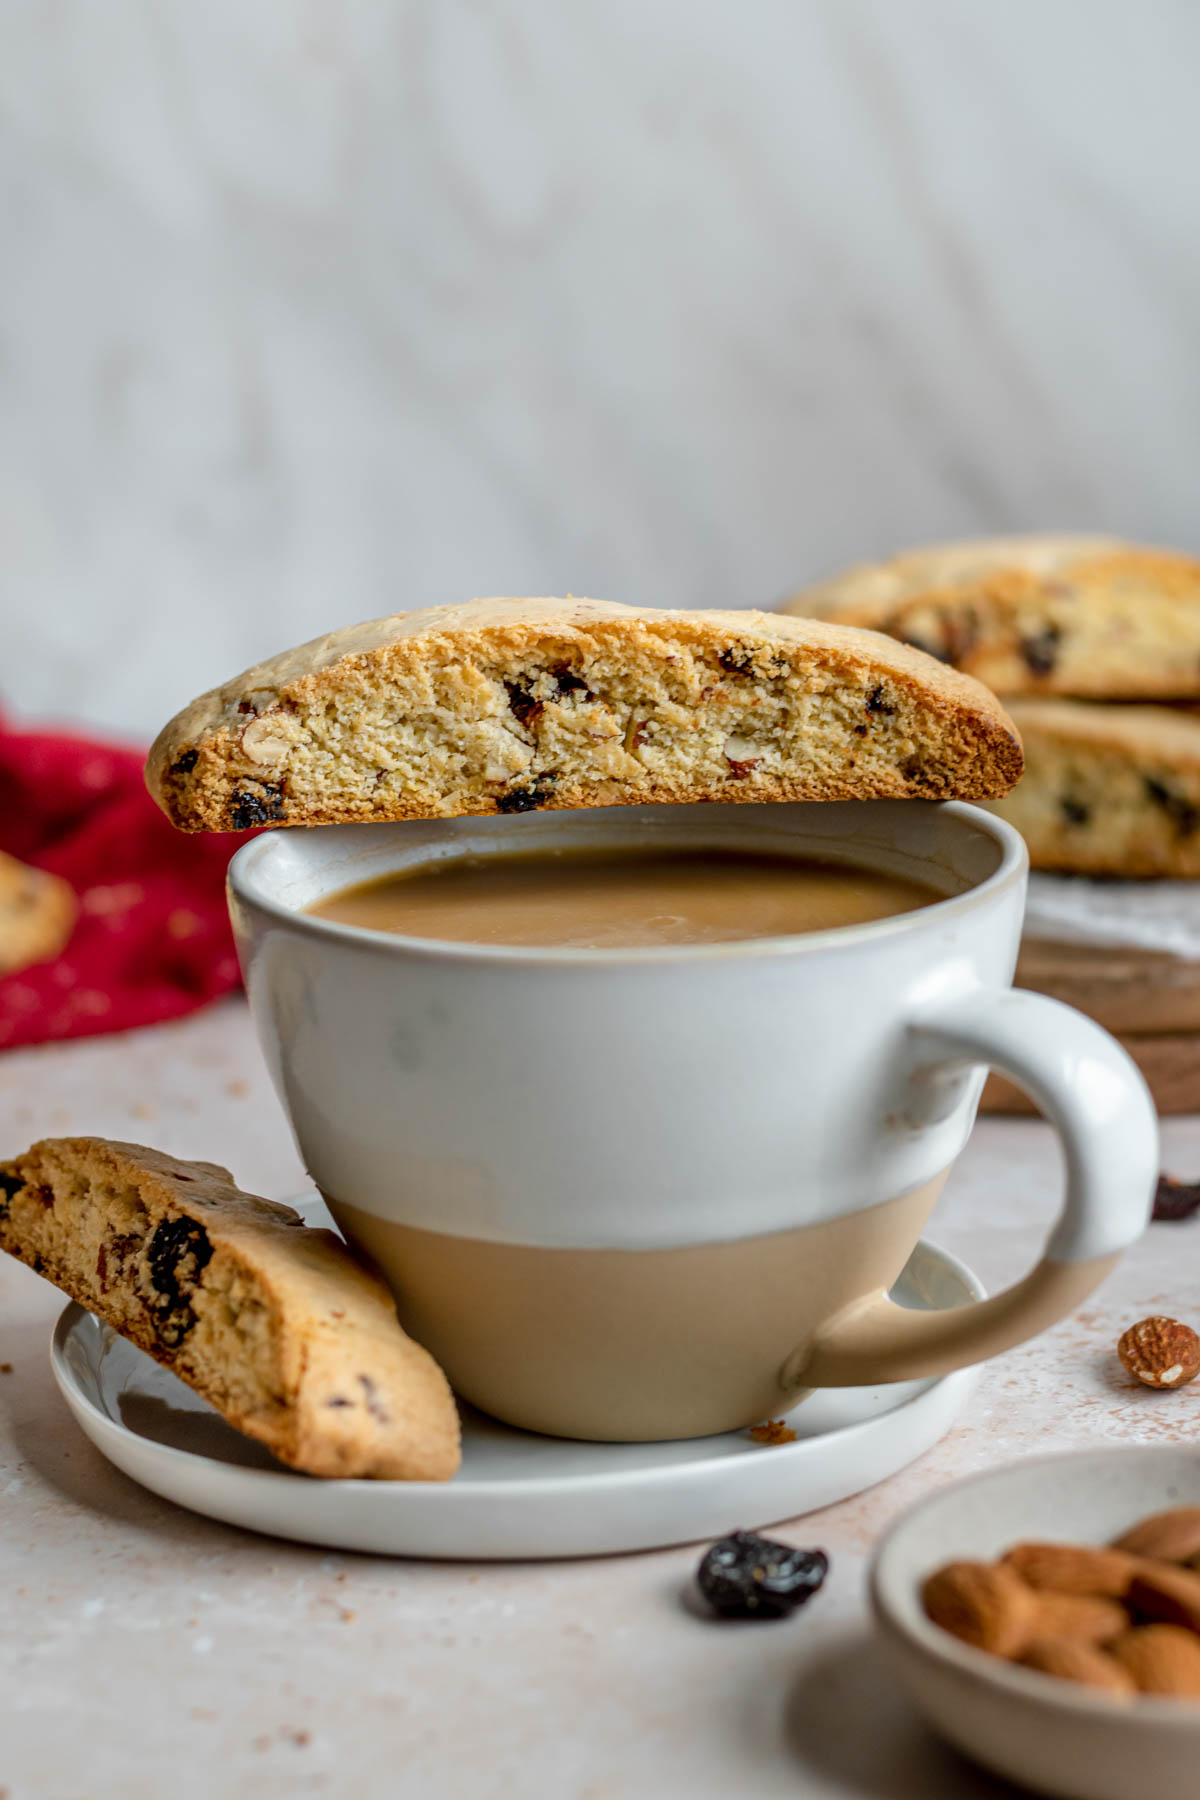 Cherry Almond Biscotti baked cookies resting on coffee cup and saucer